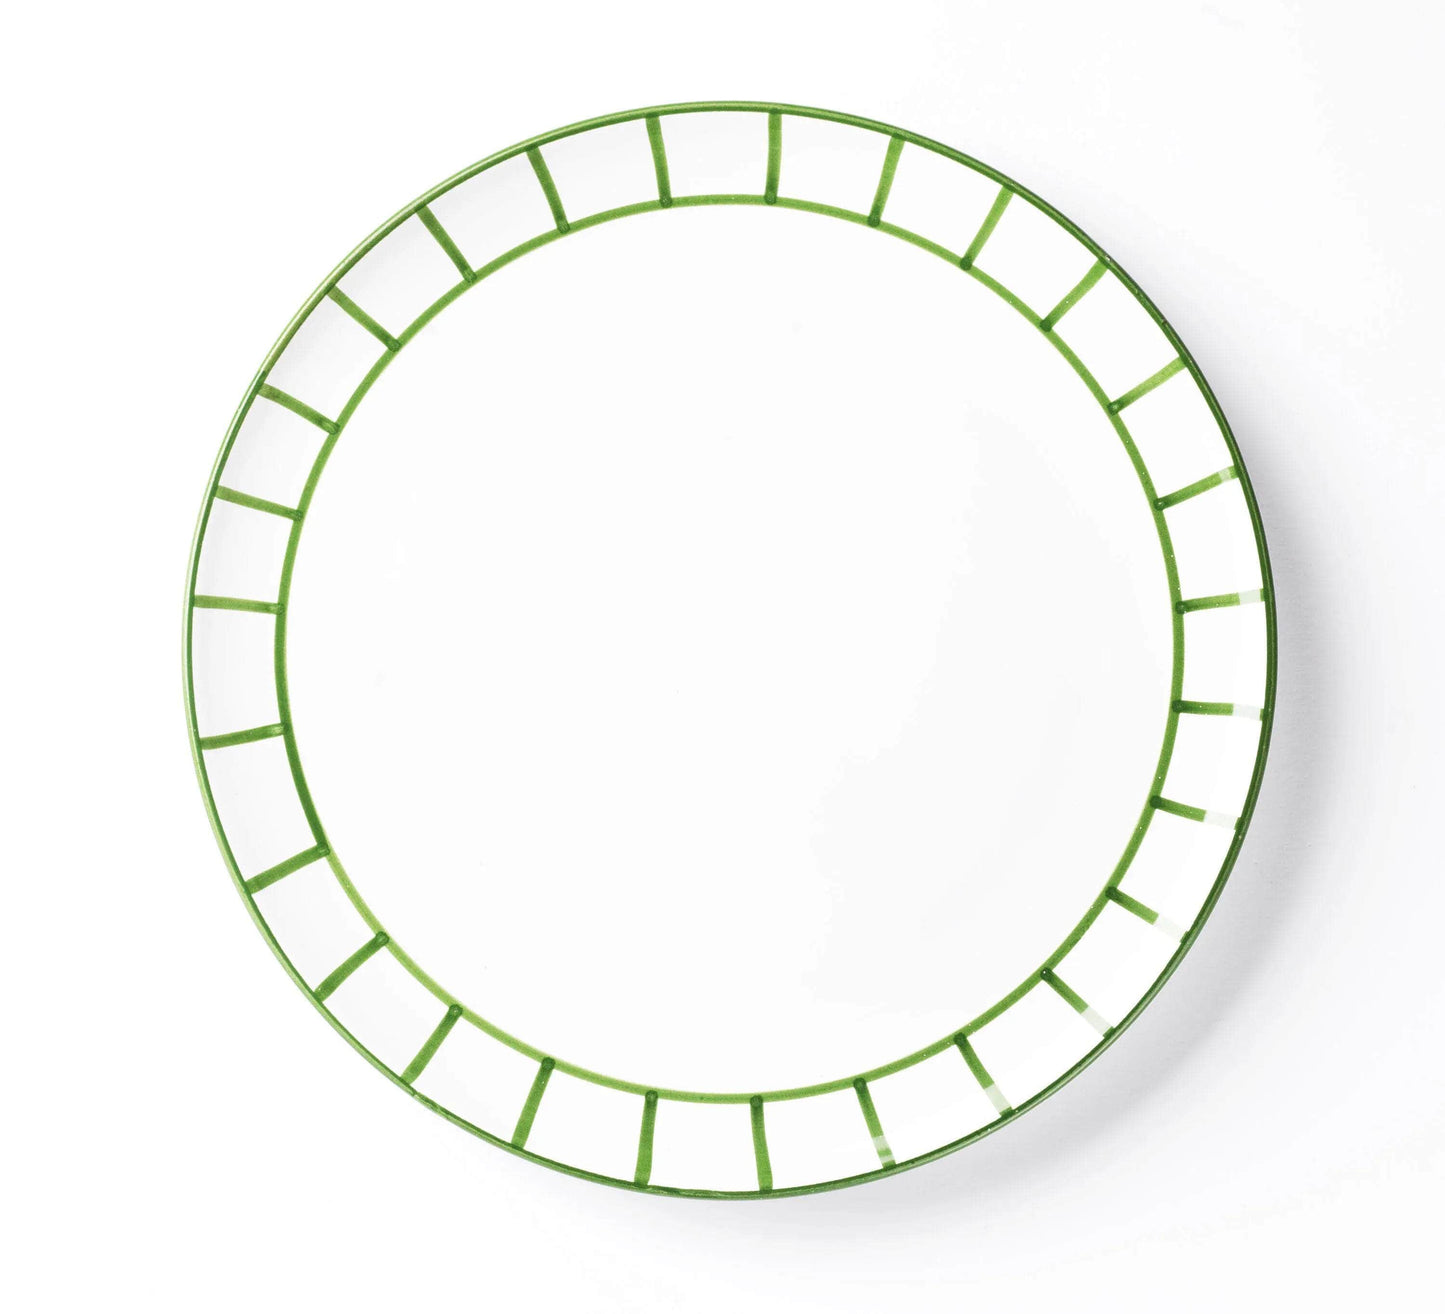 Dinner Plate - Olive Green Fence